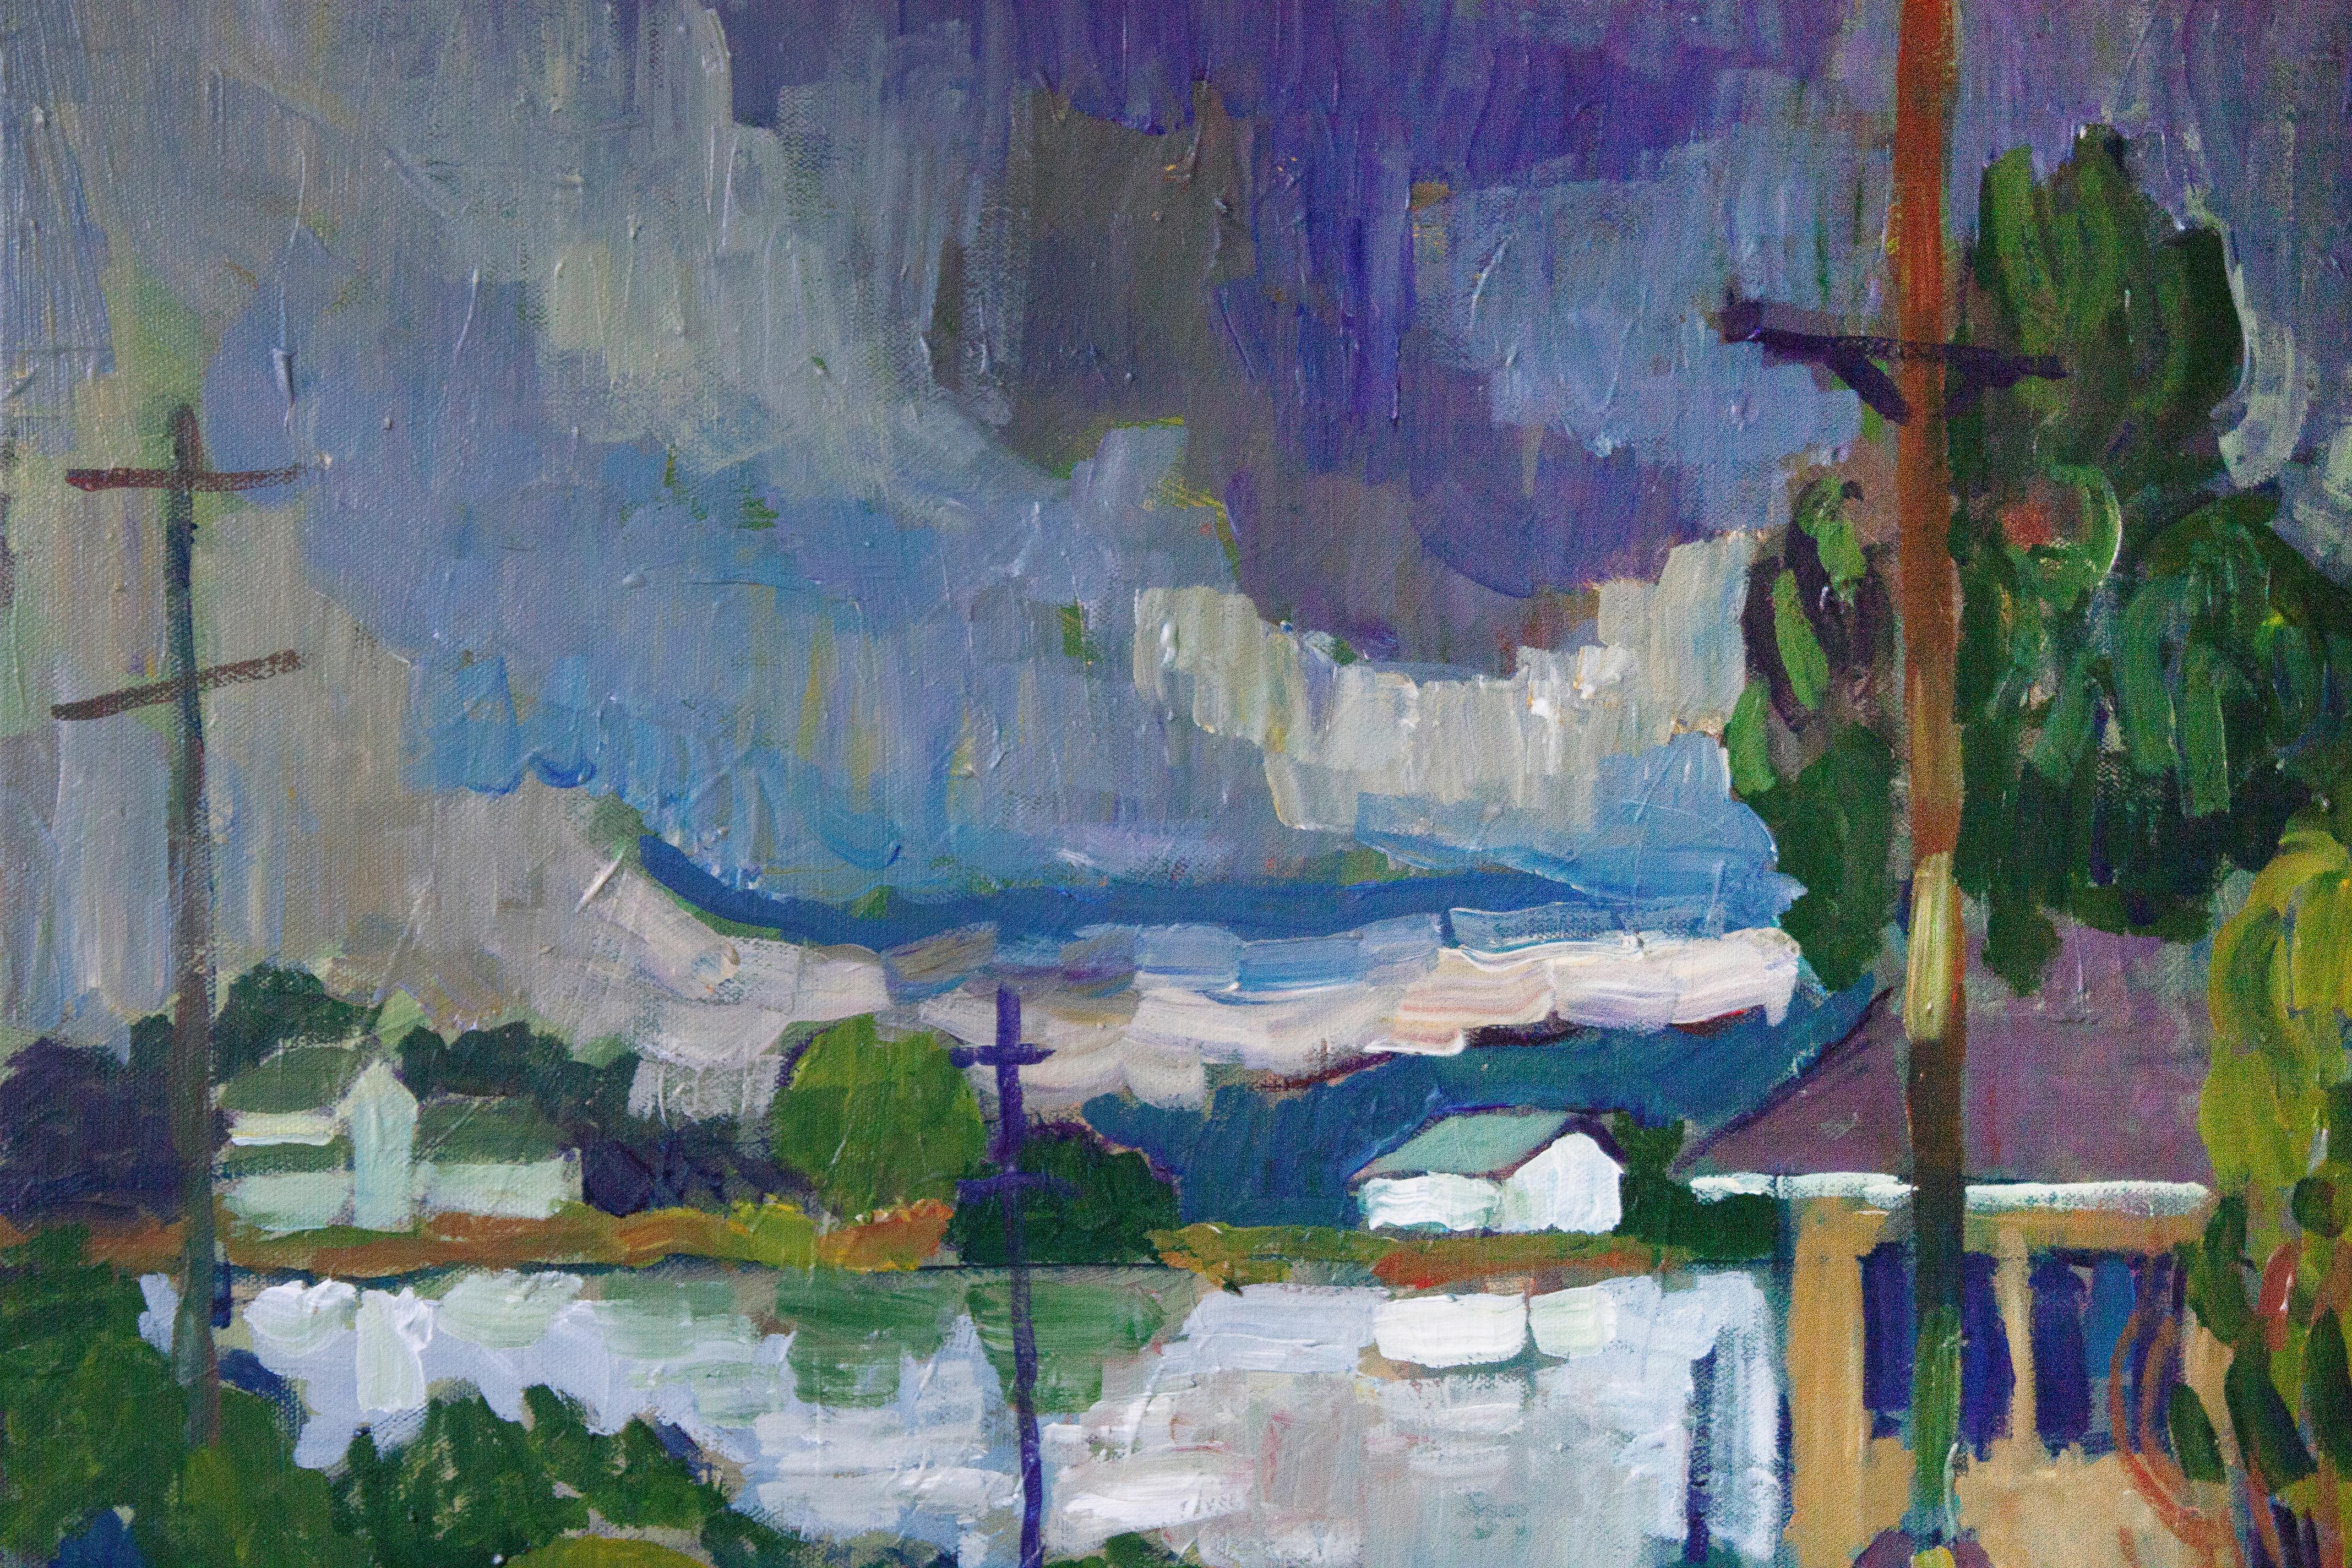 <p>Artist Comments<br />Based on a personal photograph taken by artist Robert Hofherr, this work captures the moment just before the rain begins to fall from heavy storm clouds over the Chesapeake and Delaware Canal. The clouds, which make up half